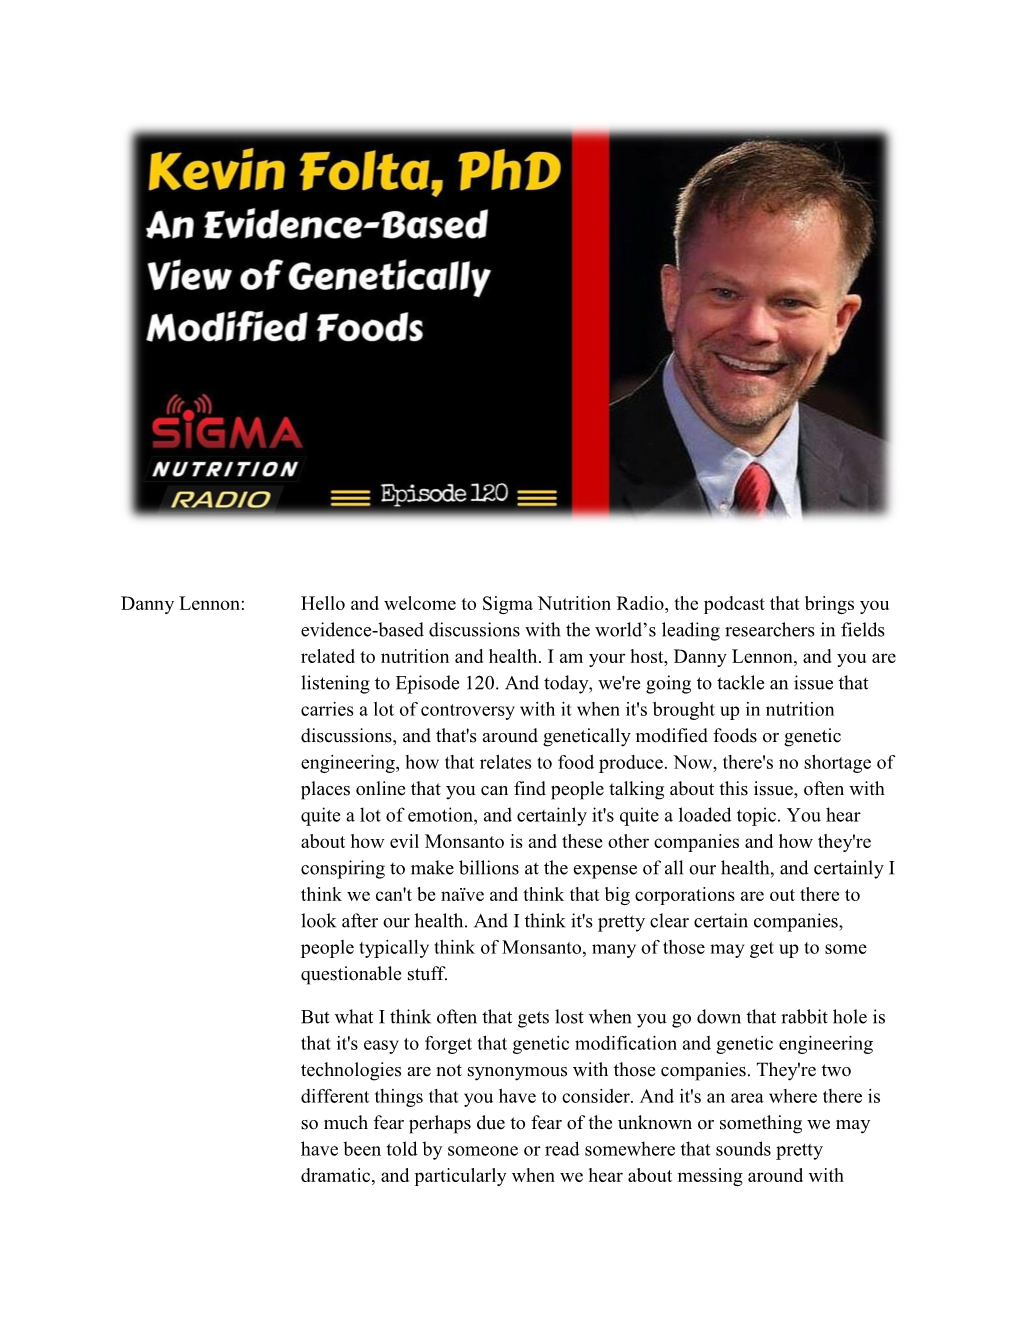 Kevin Folta from the University of Florida Where He Is a Professor and Chairman of the Horticultural Sciences Department